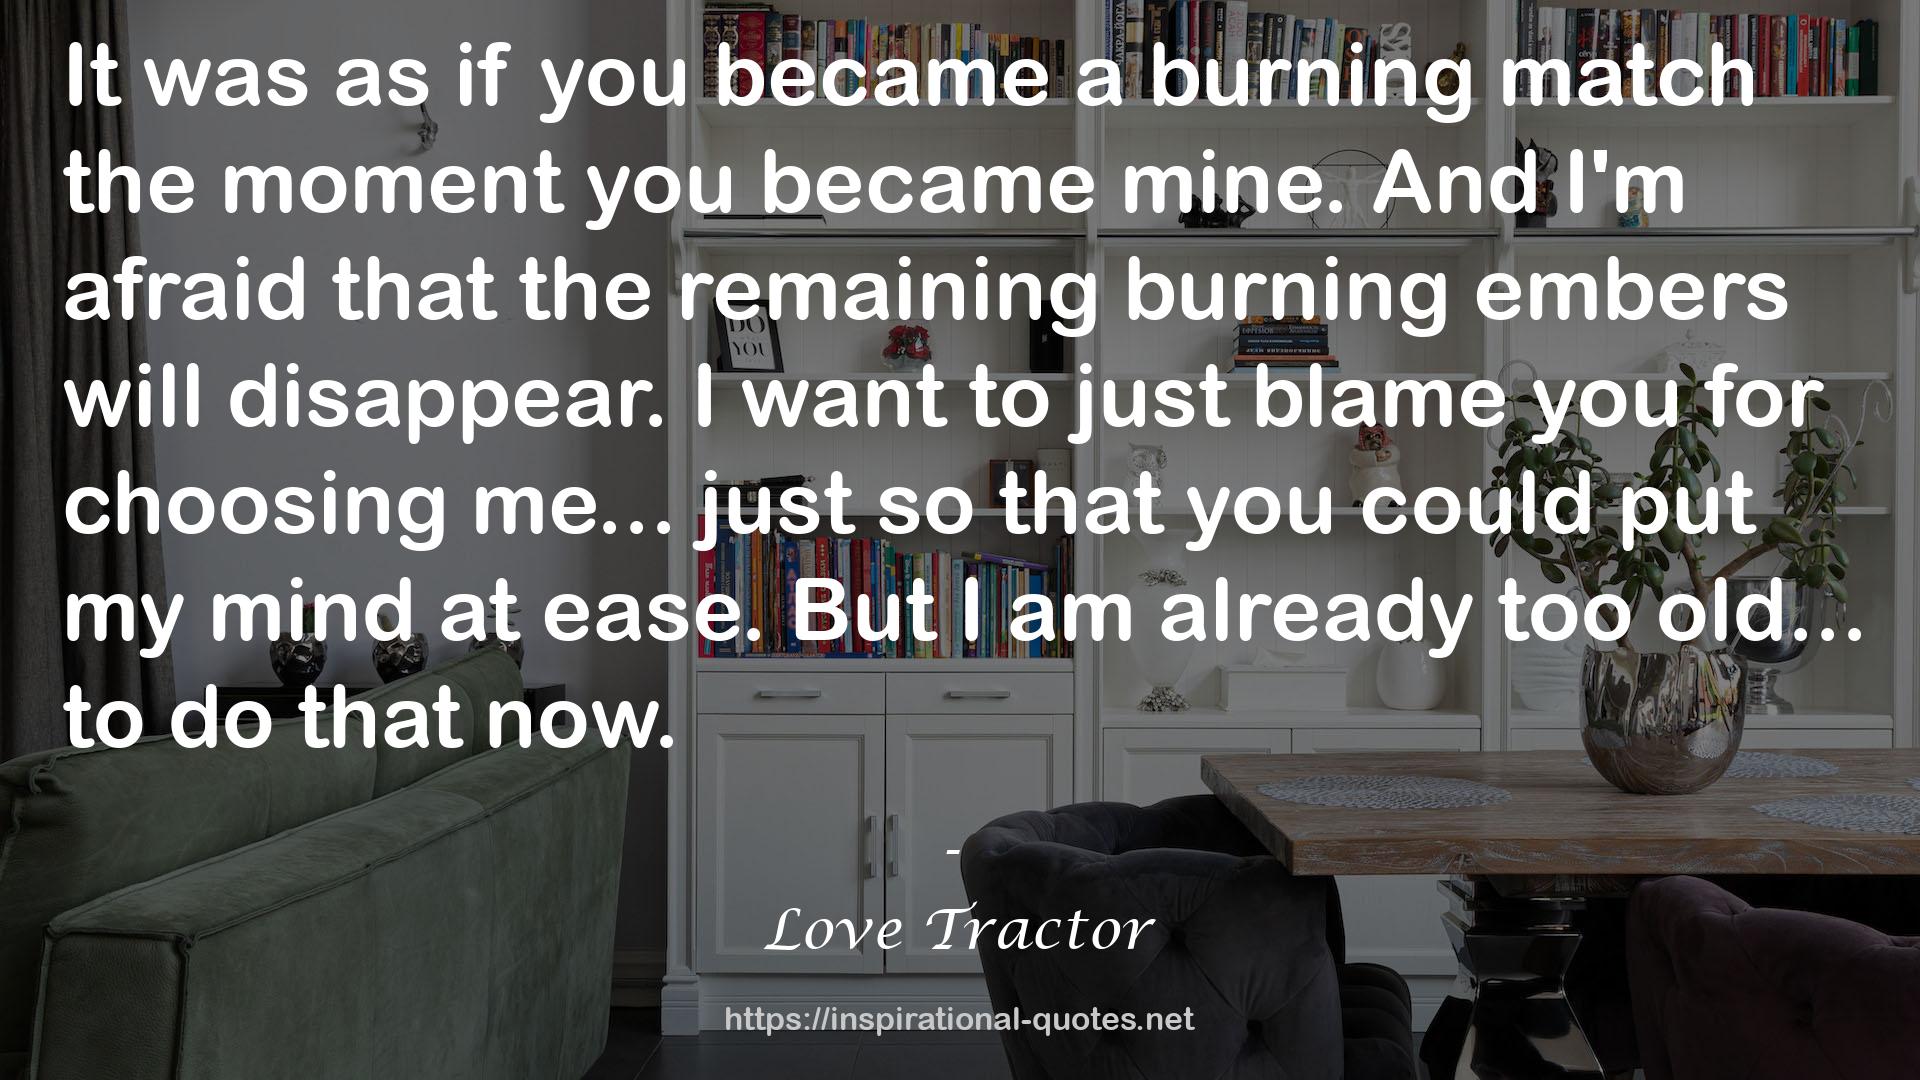 Love Tractor QUOTES